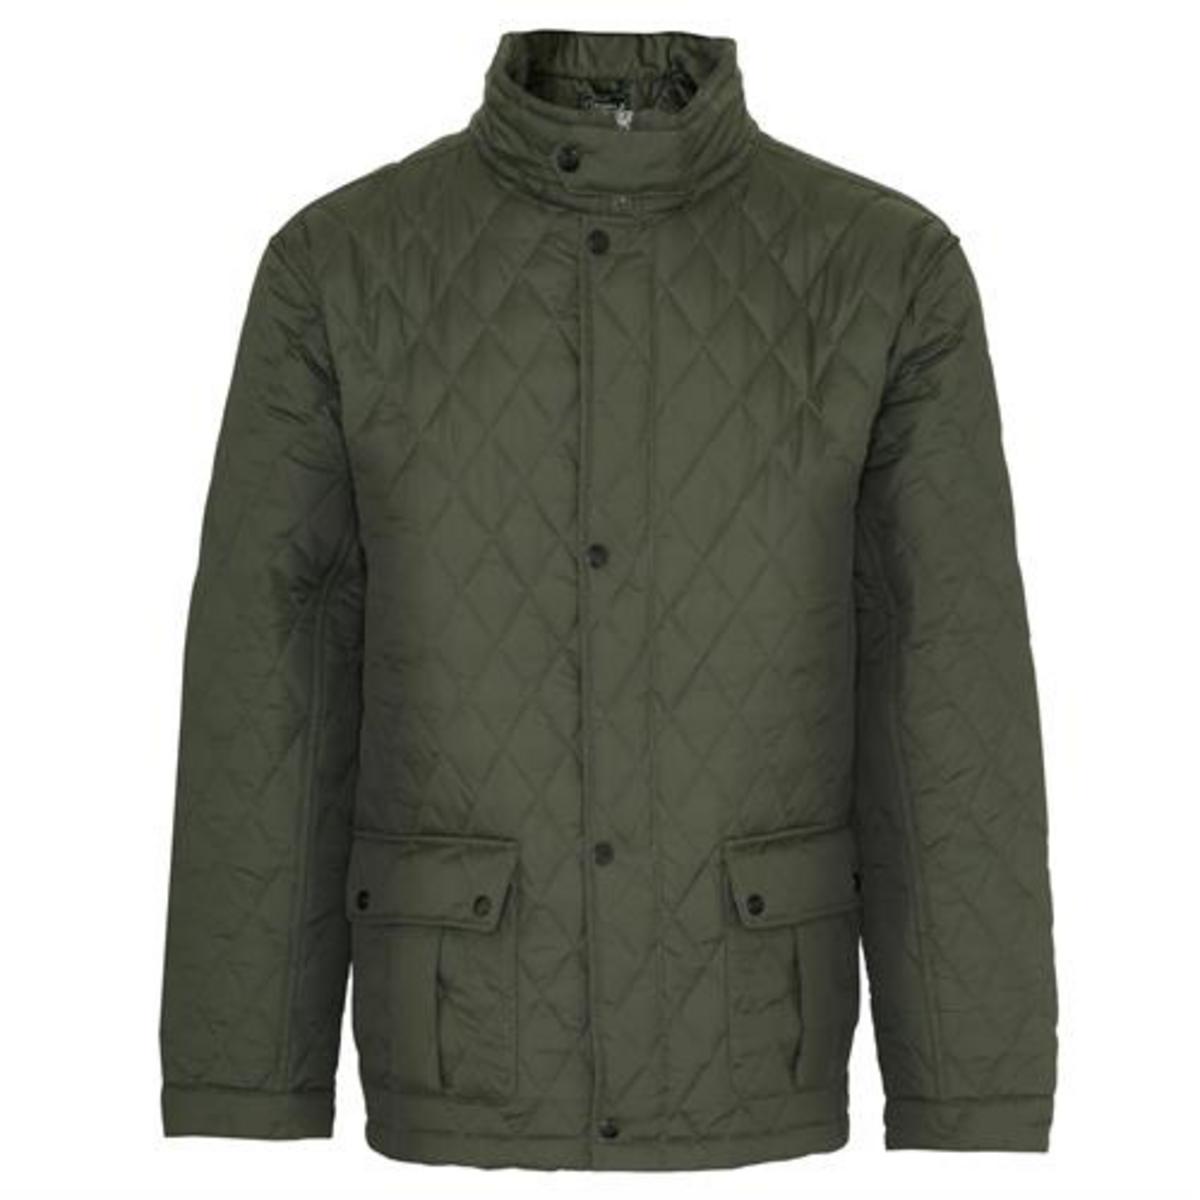 Game Mens Champion Padstow Diamond Quilted Jacket | eBay